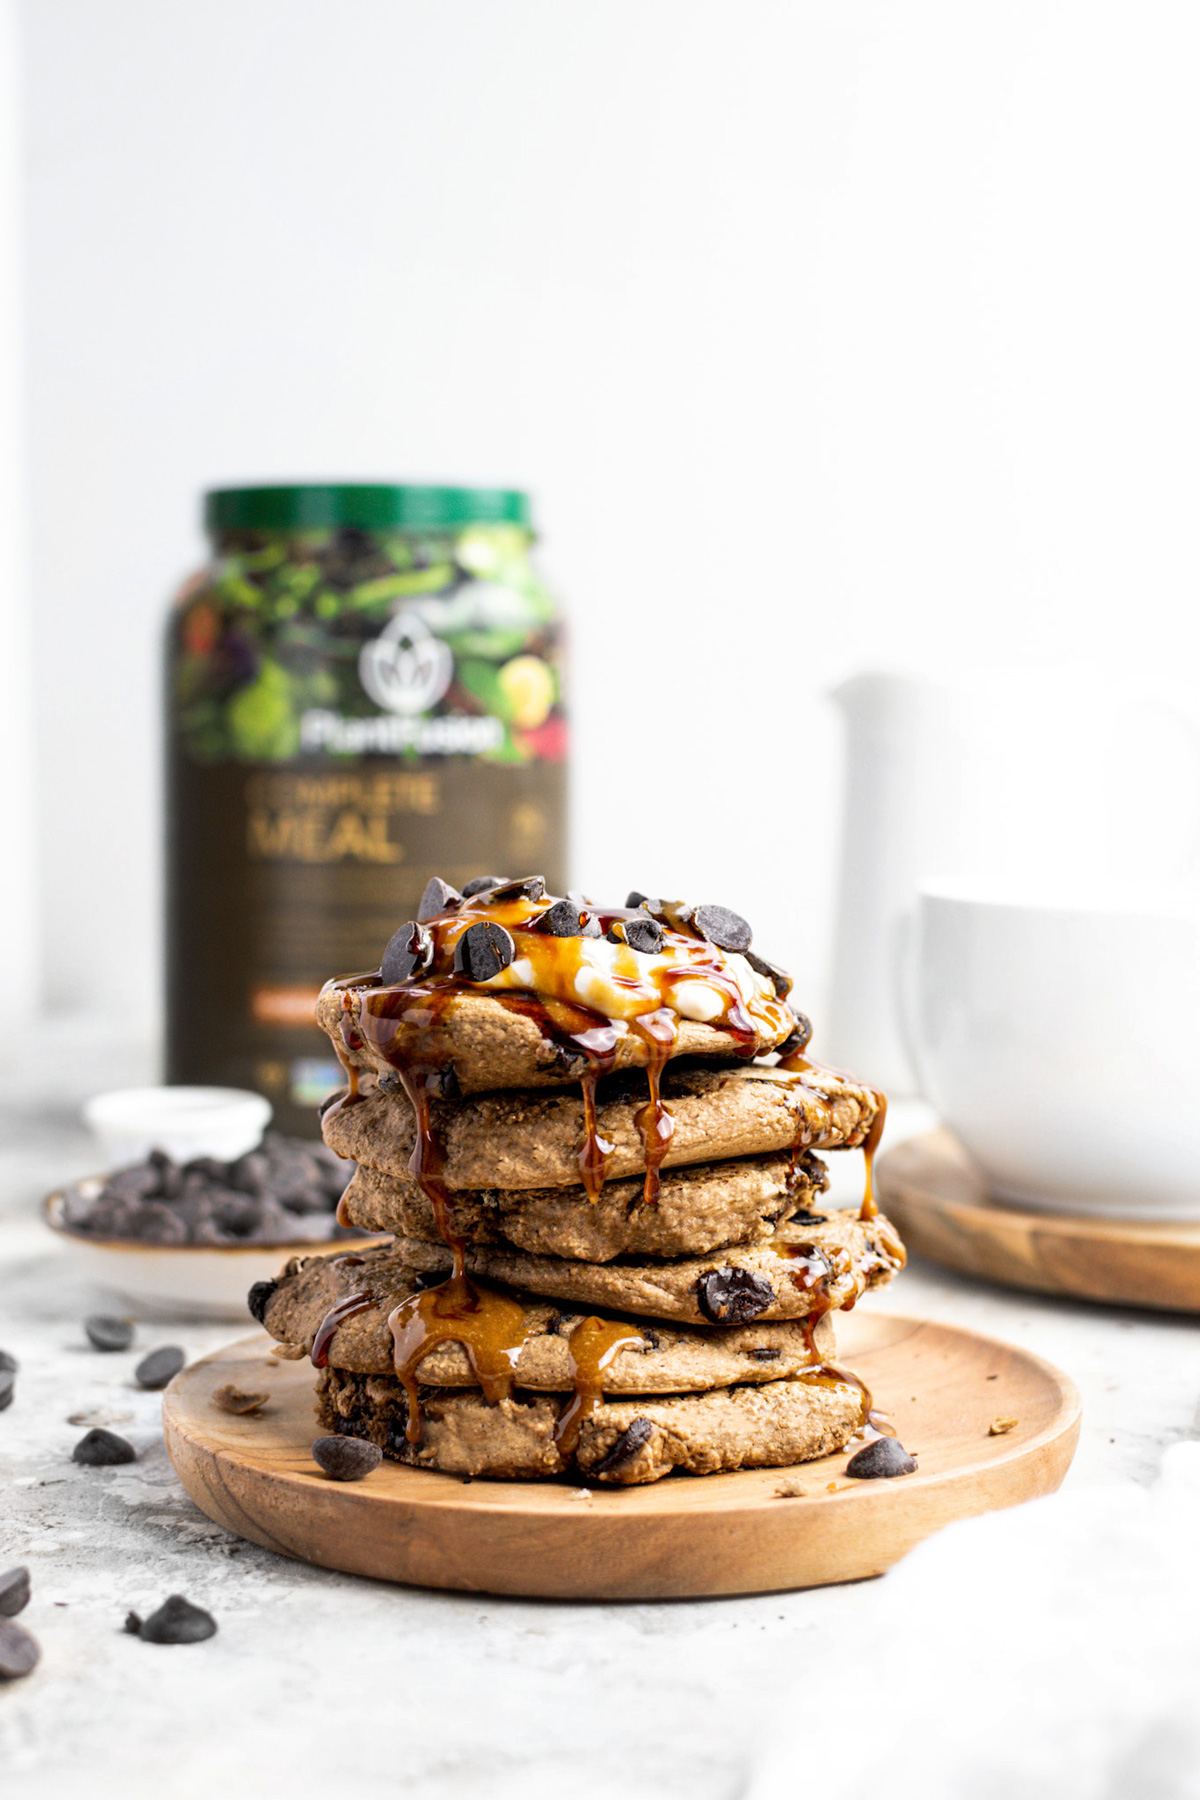 The chocolate protein pancakes stacked on top oof each other with caramel and chocolate dripping down the pancakes